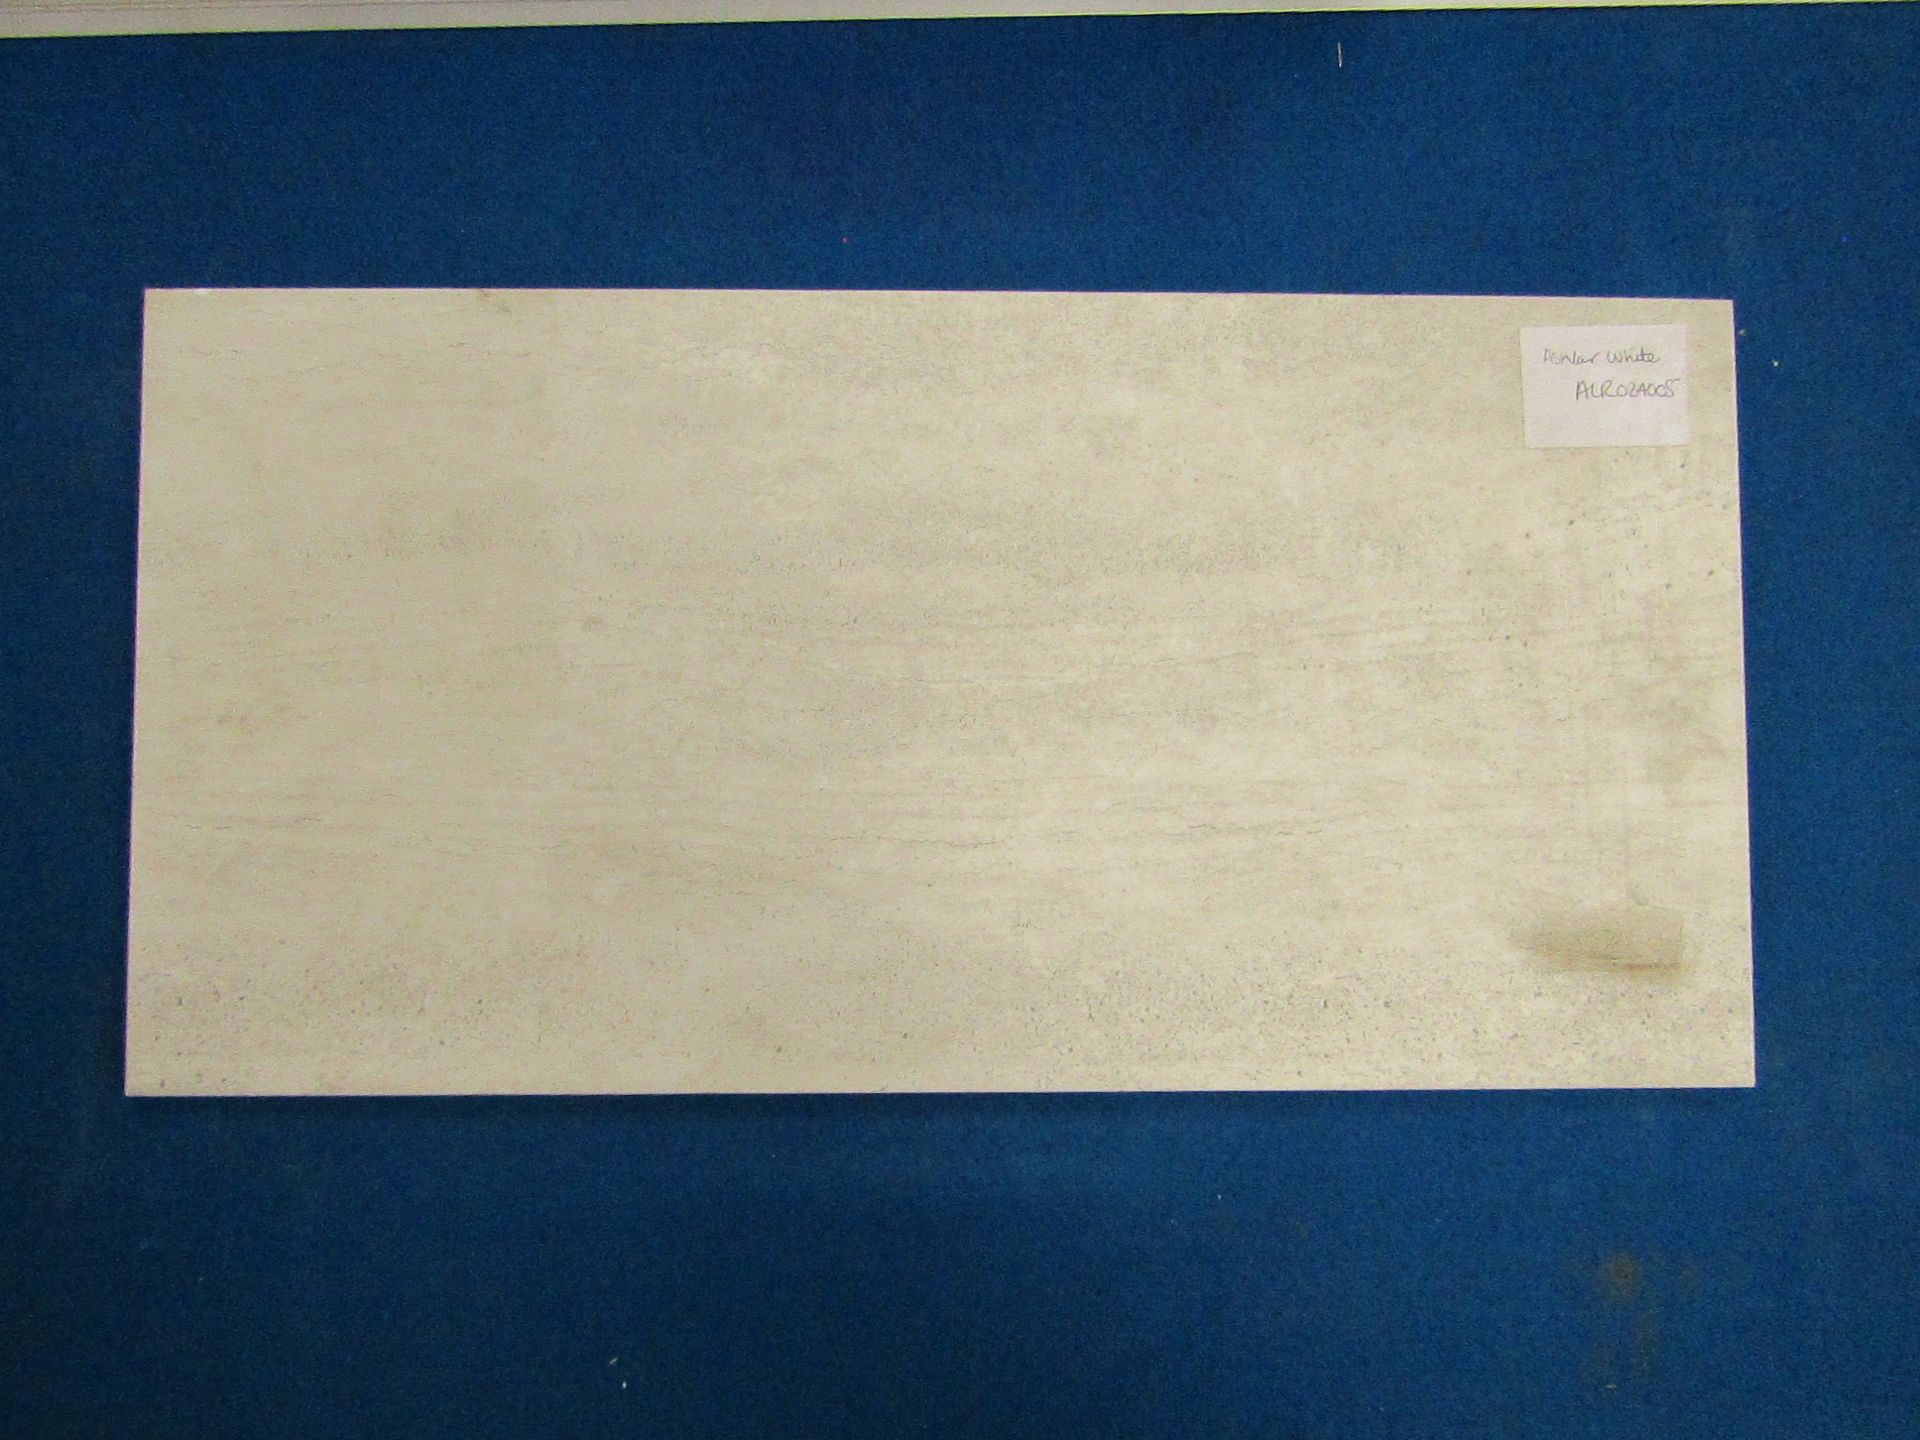 Pallet of 40x Packs of 5 Aslar White 300x600 wall and Floor Tiles By Johnsons, New, the pallet